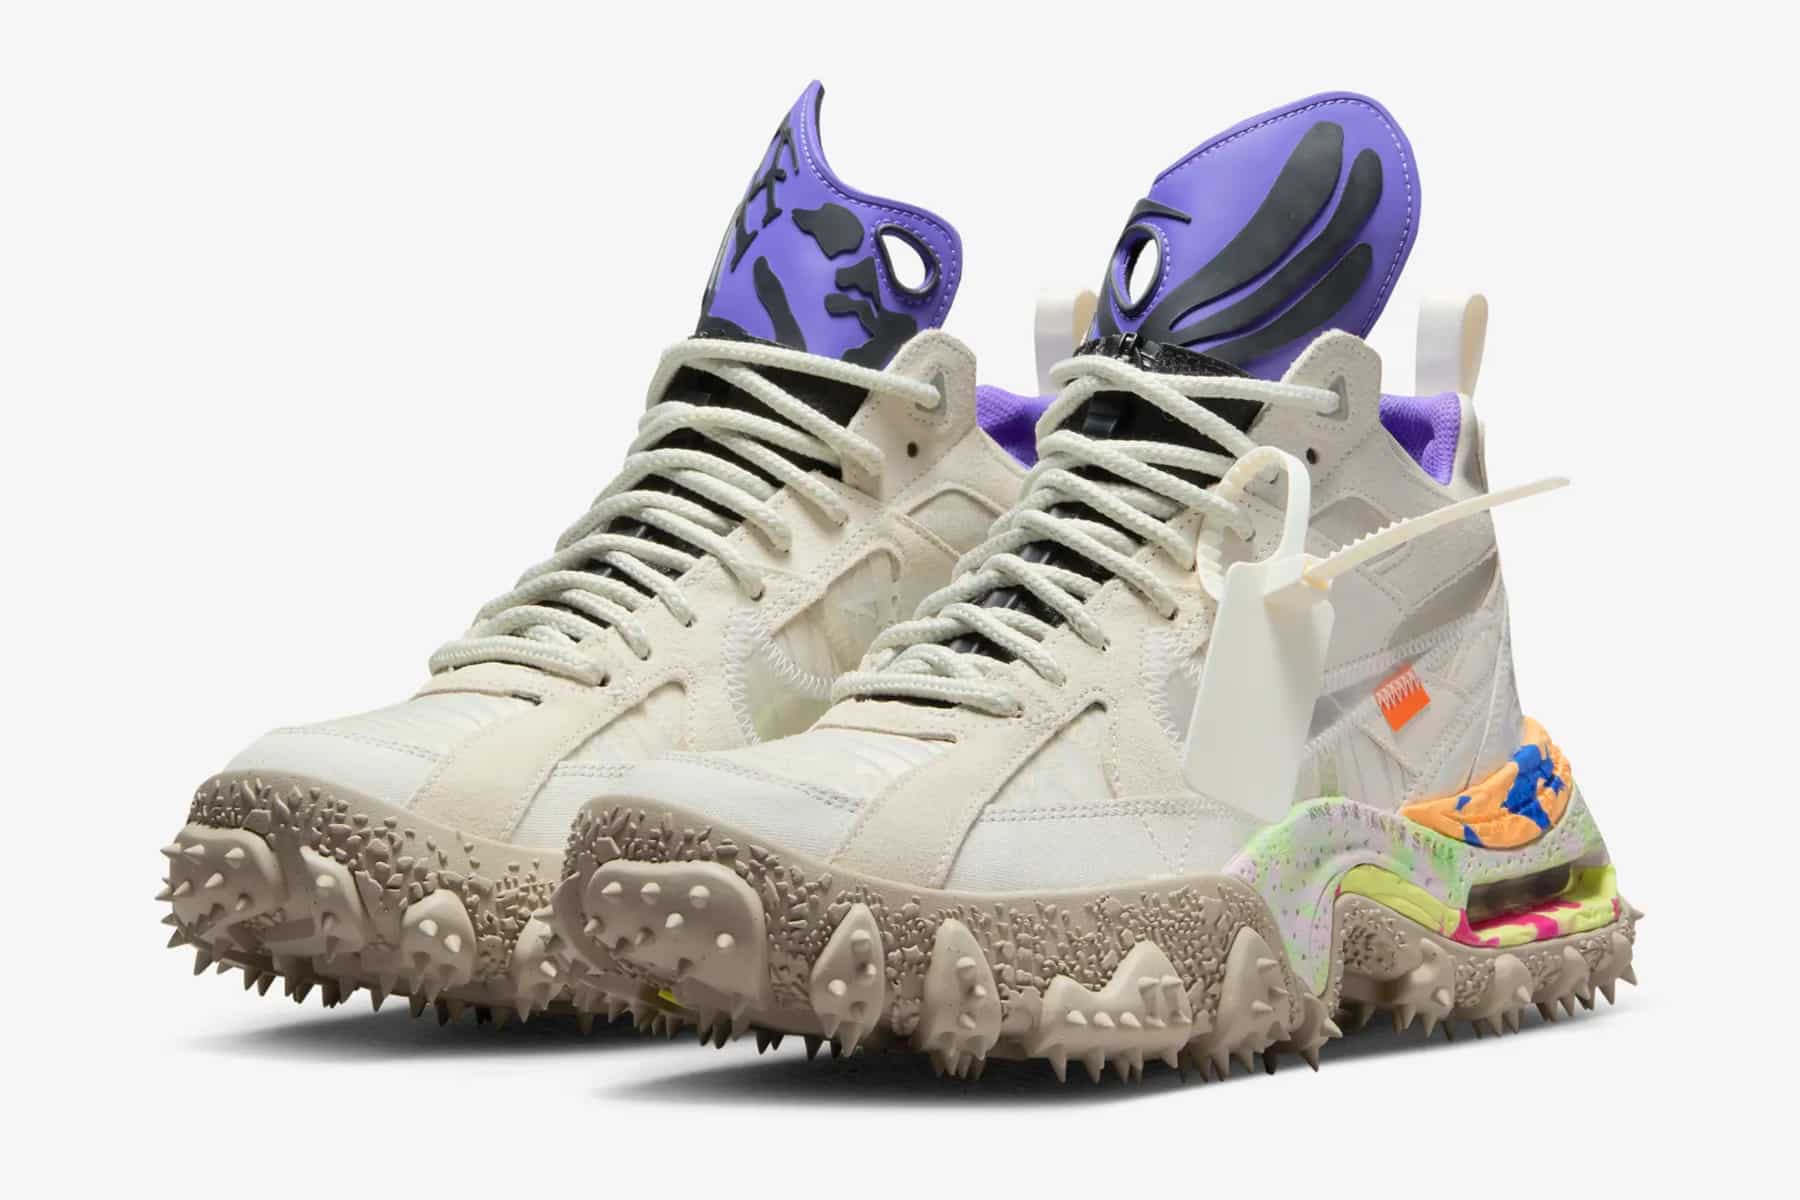 Off-White Nike Air Terrra Forma Summit White and PSYCHIC PURPLE